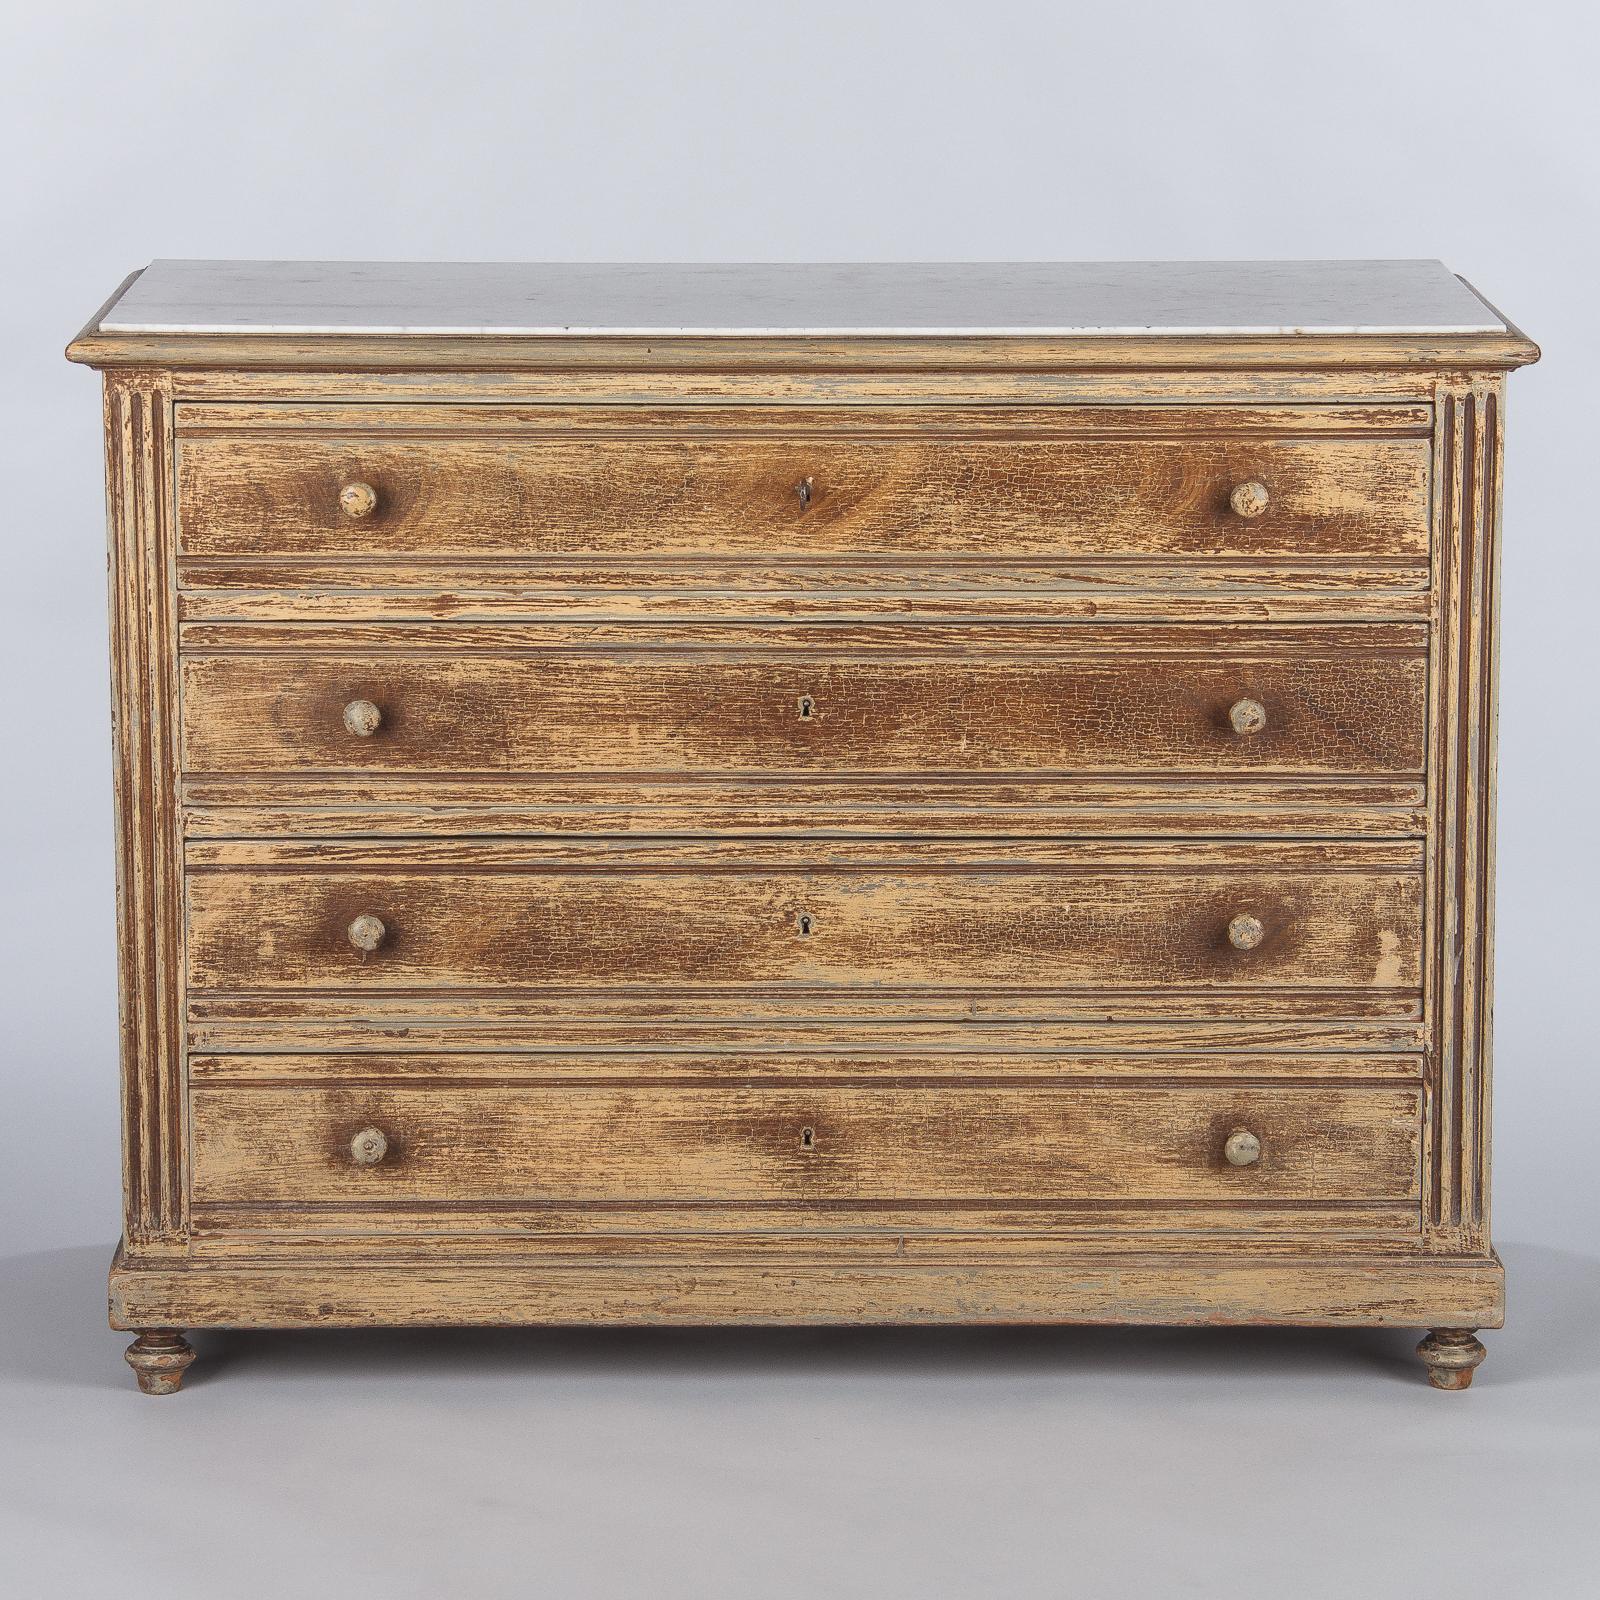 20th Century French Louis XVI Style Painted Chest of Drawers with Marble Top, 1900s